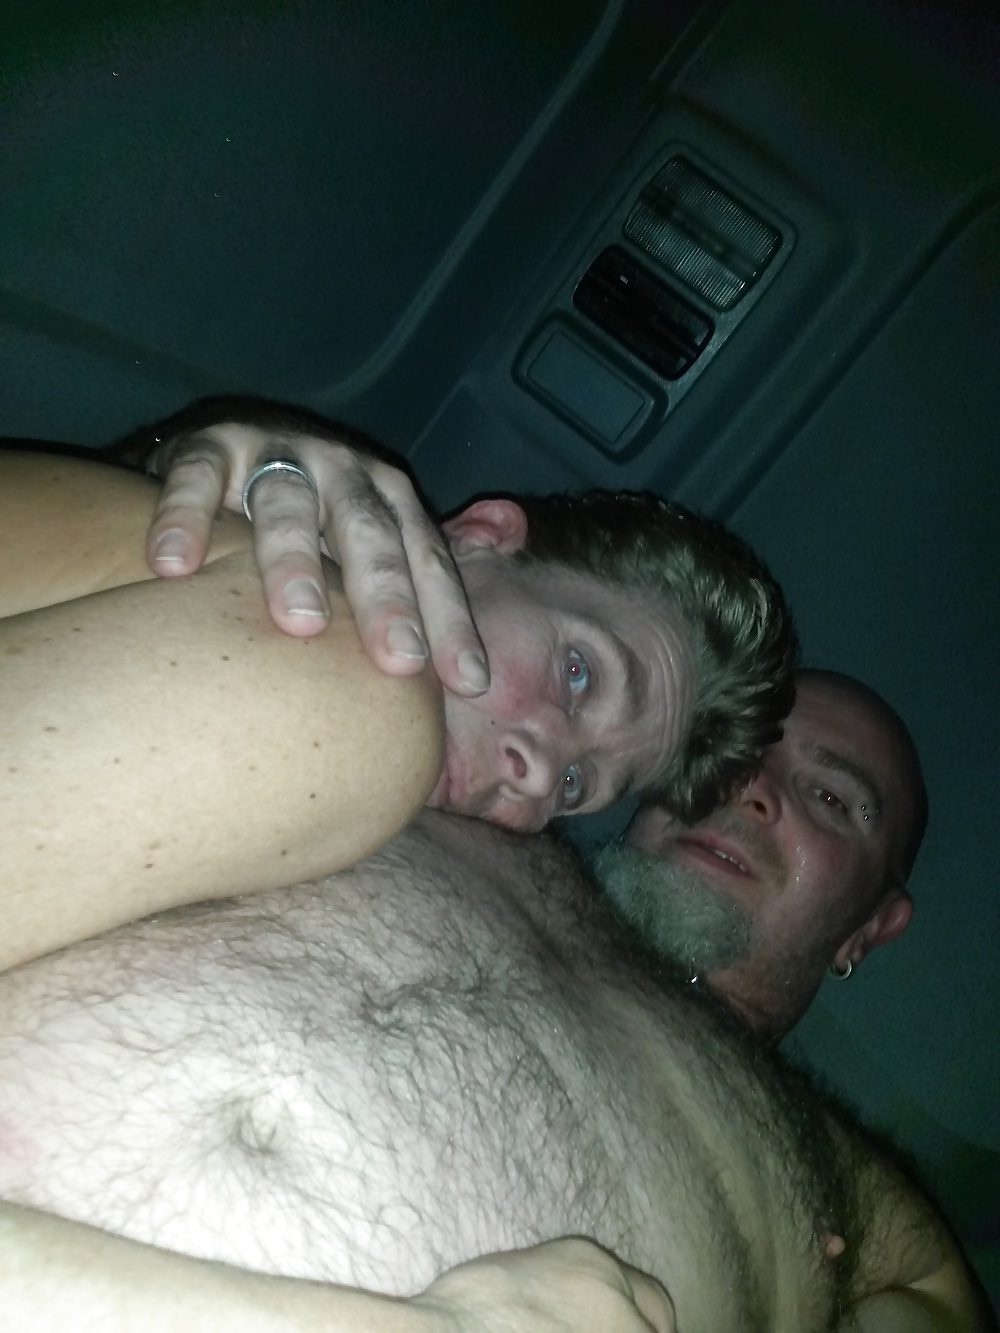 Trucking,licking and fucking all holes #28355824